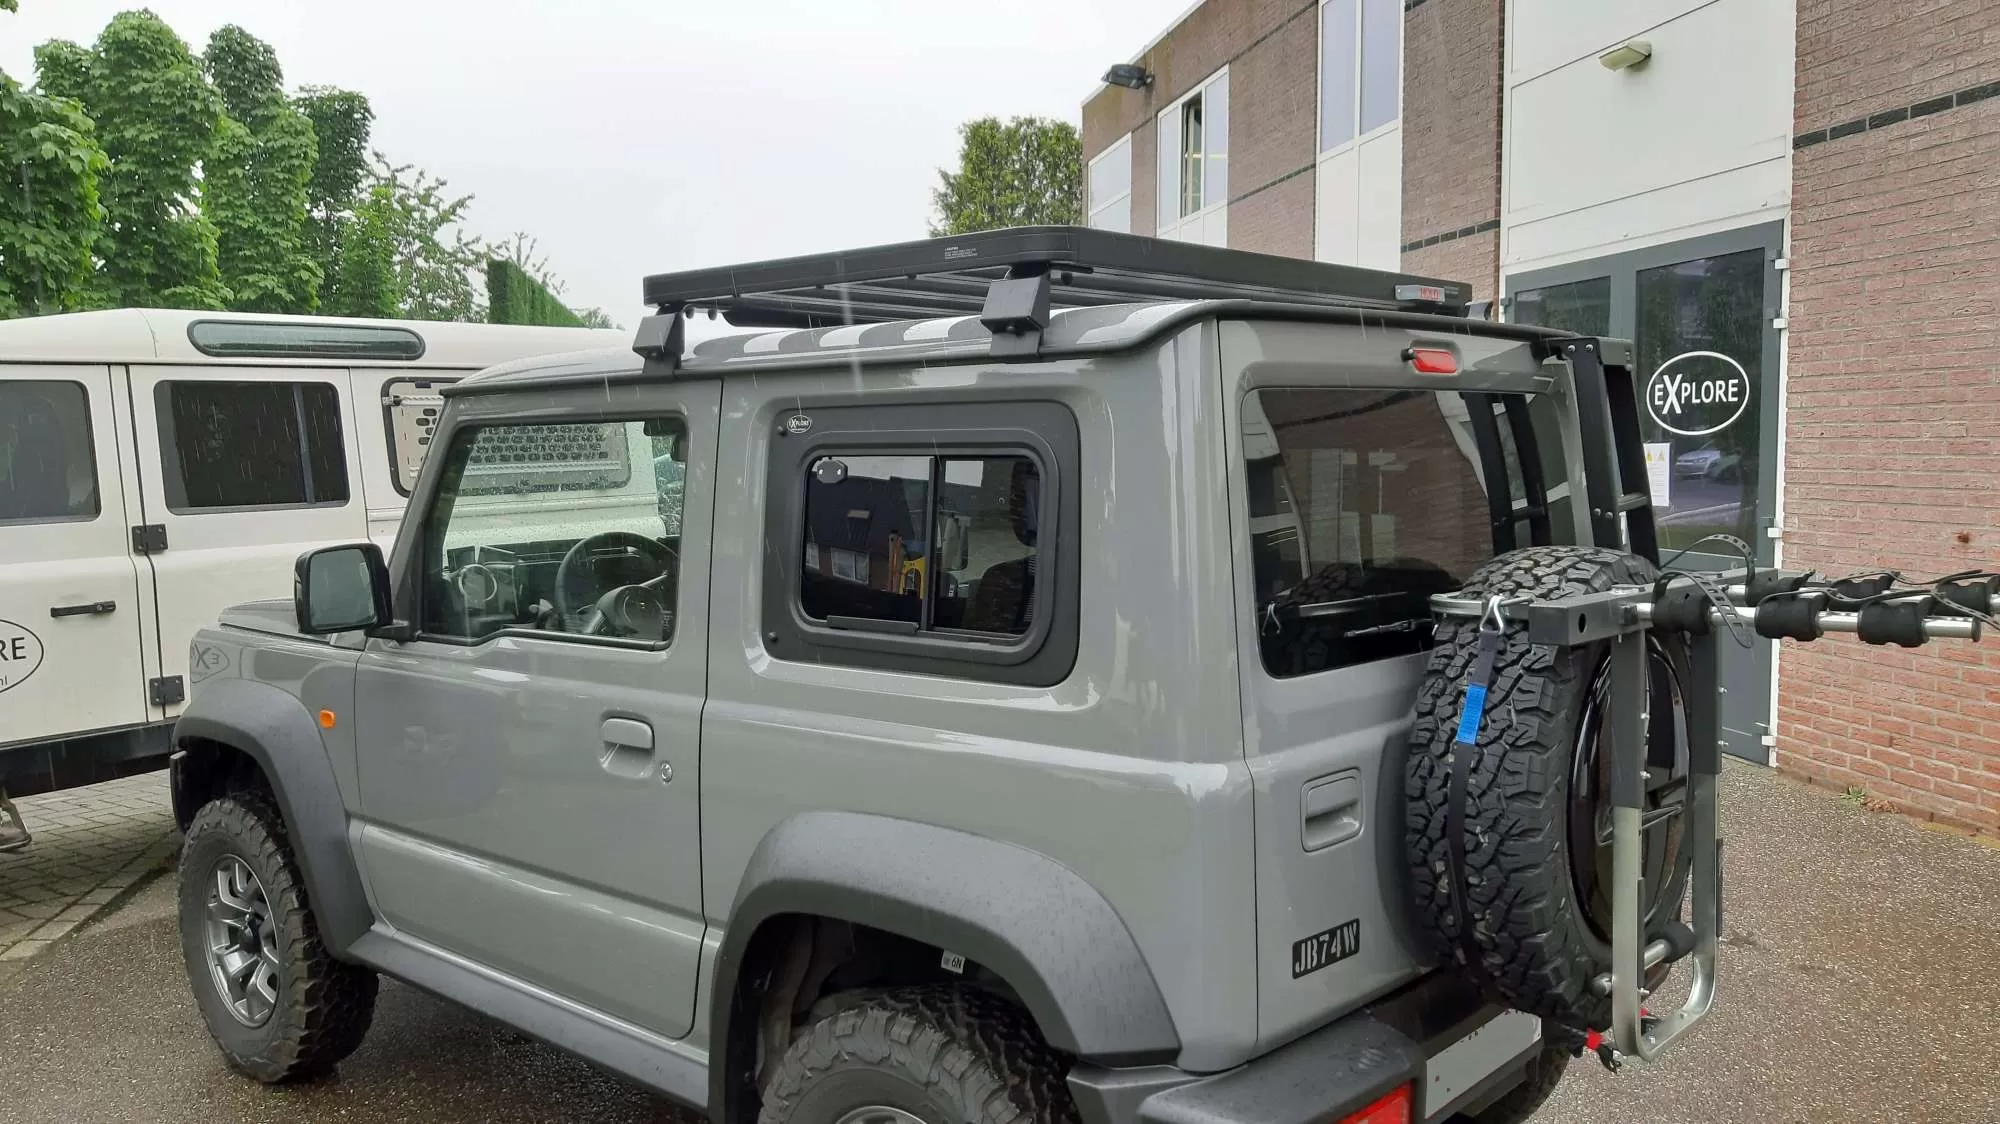 Suzuki Jimny GJ (JB74), HJ, GLX 3-door fitted with Explore Glazing sliding windows, showcasing the vehicle's rugged off-road capabilities with roof rack and spare tire mounted on the back.